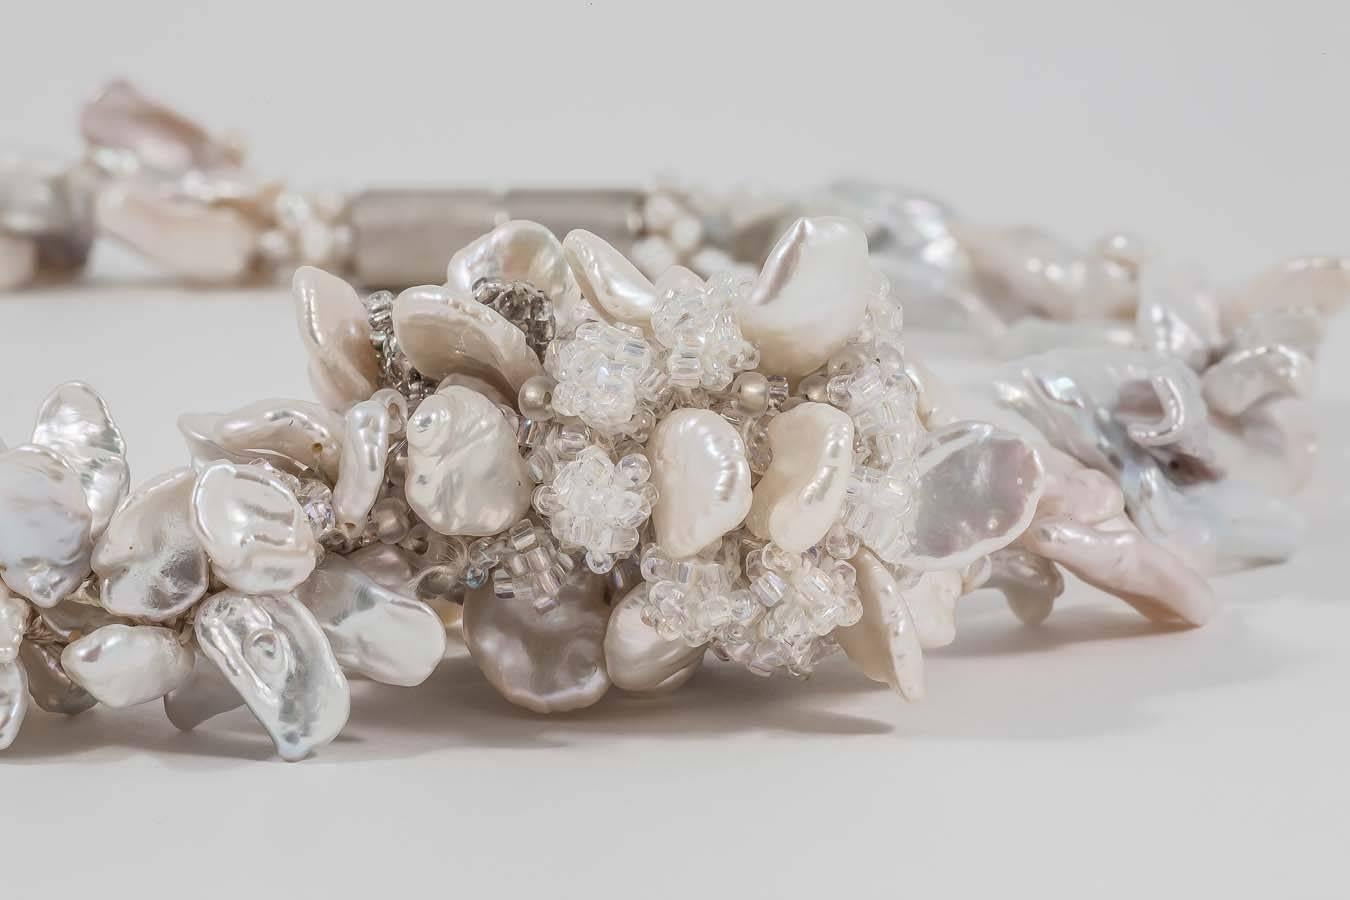 Beguiling cluster of free-form freshwater pearls and Japanese glass seed beads entwine to create a statement neckpiece. Handcrafted by Donna Brennan in her London studio, it is clinched at the nape of the neck with a Sterling Silver